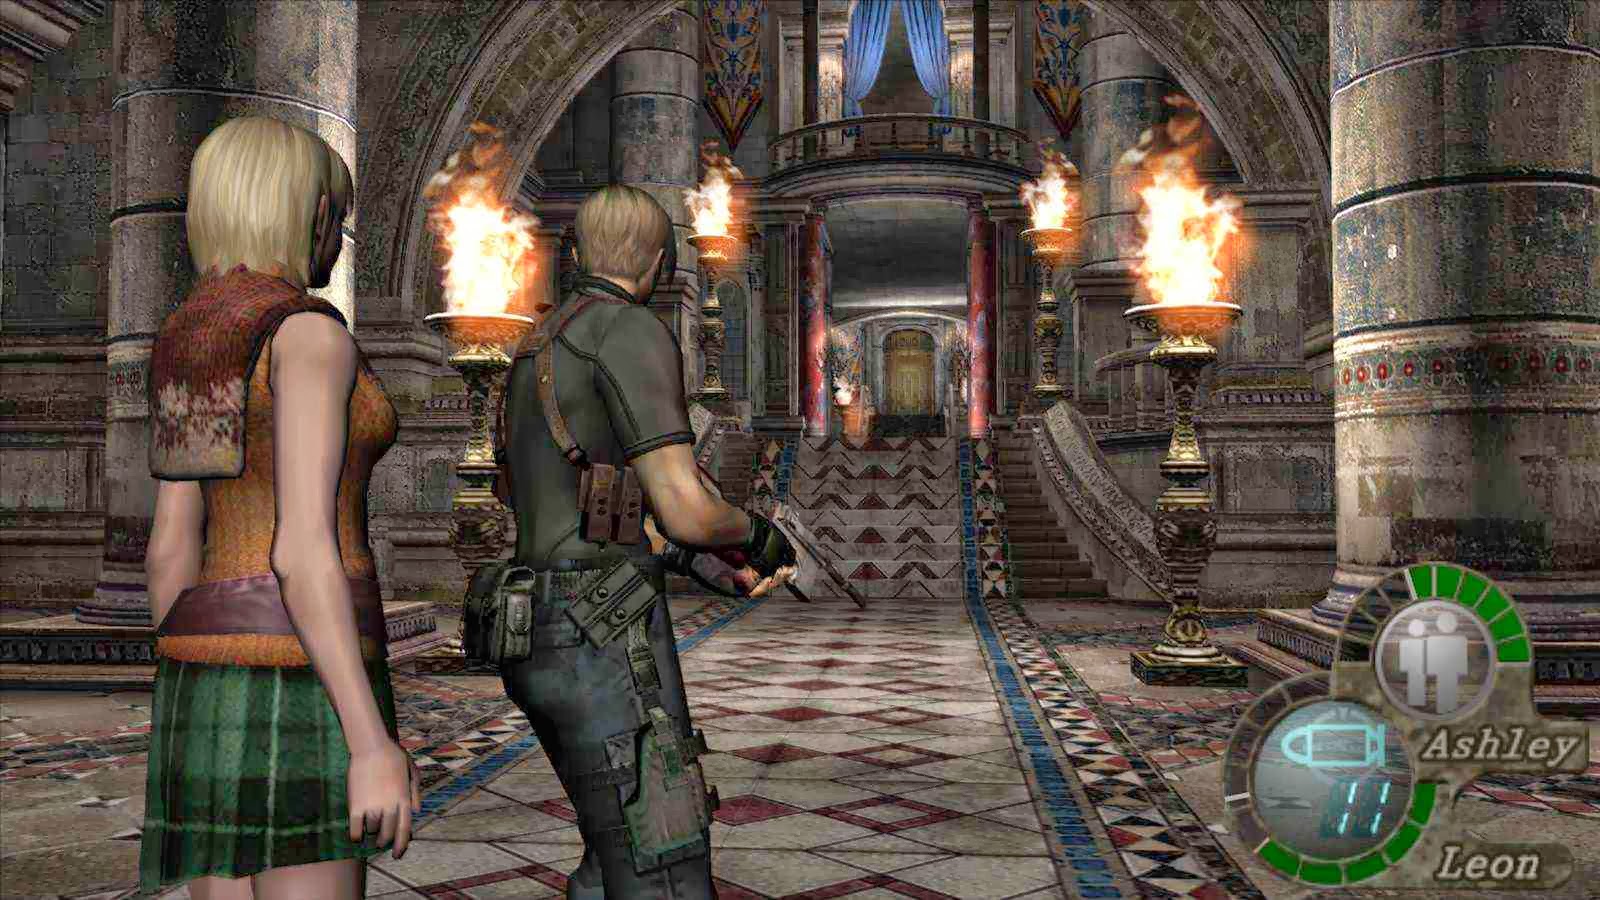 PS2 Games For PC: Resident Evil 4 PC Download, Resident Evild 4 PC ...